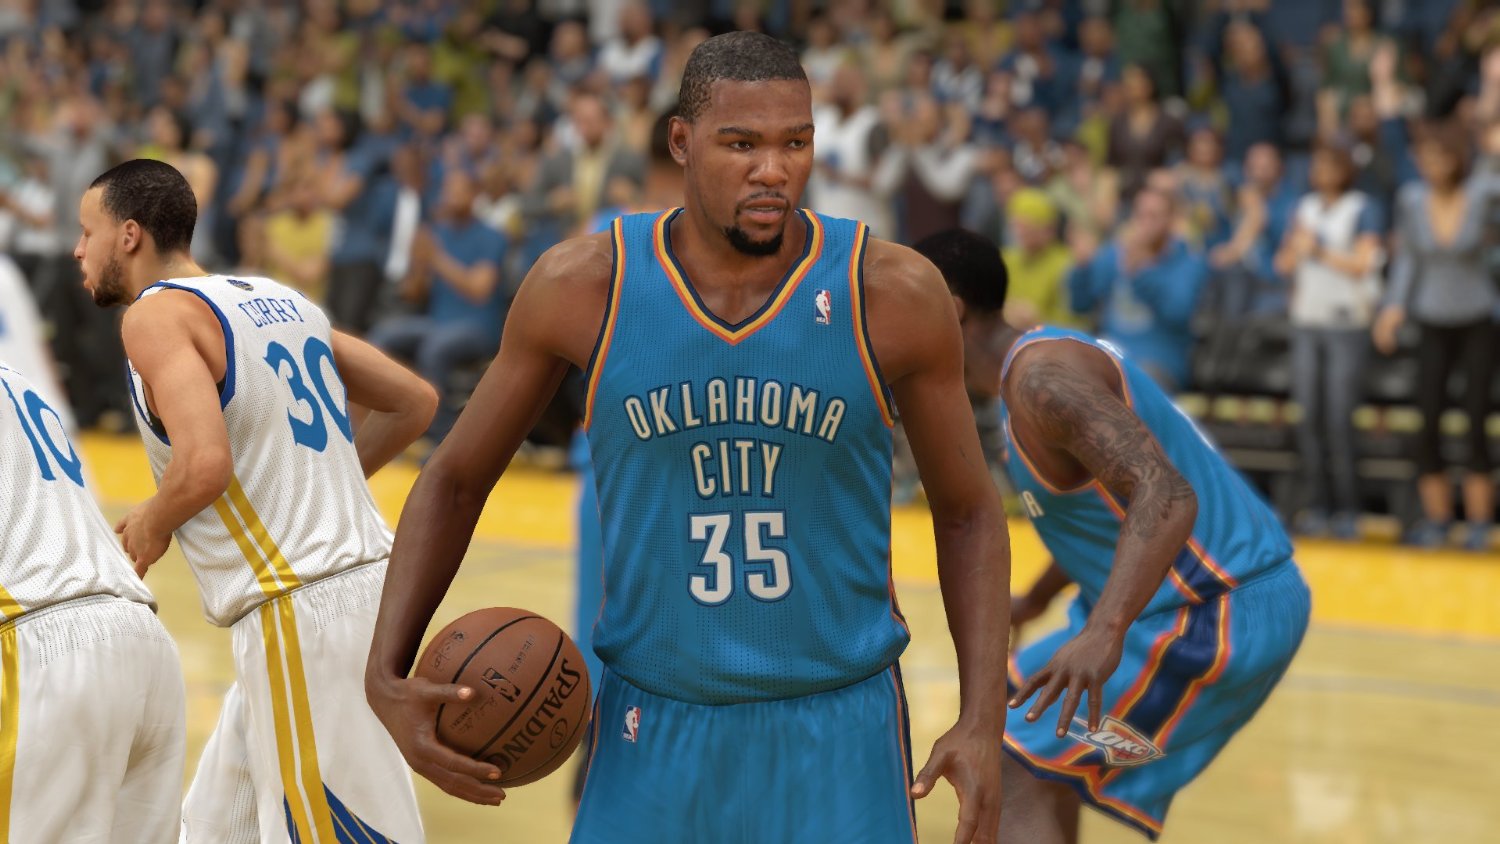 nba 2k14 on pc for free